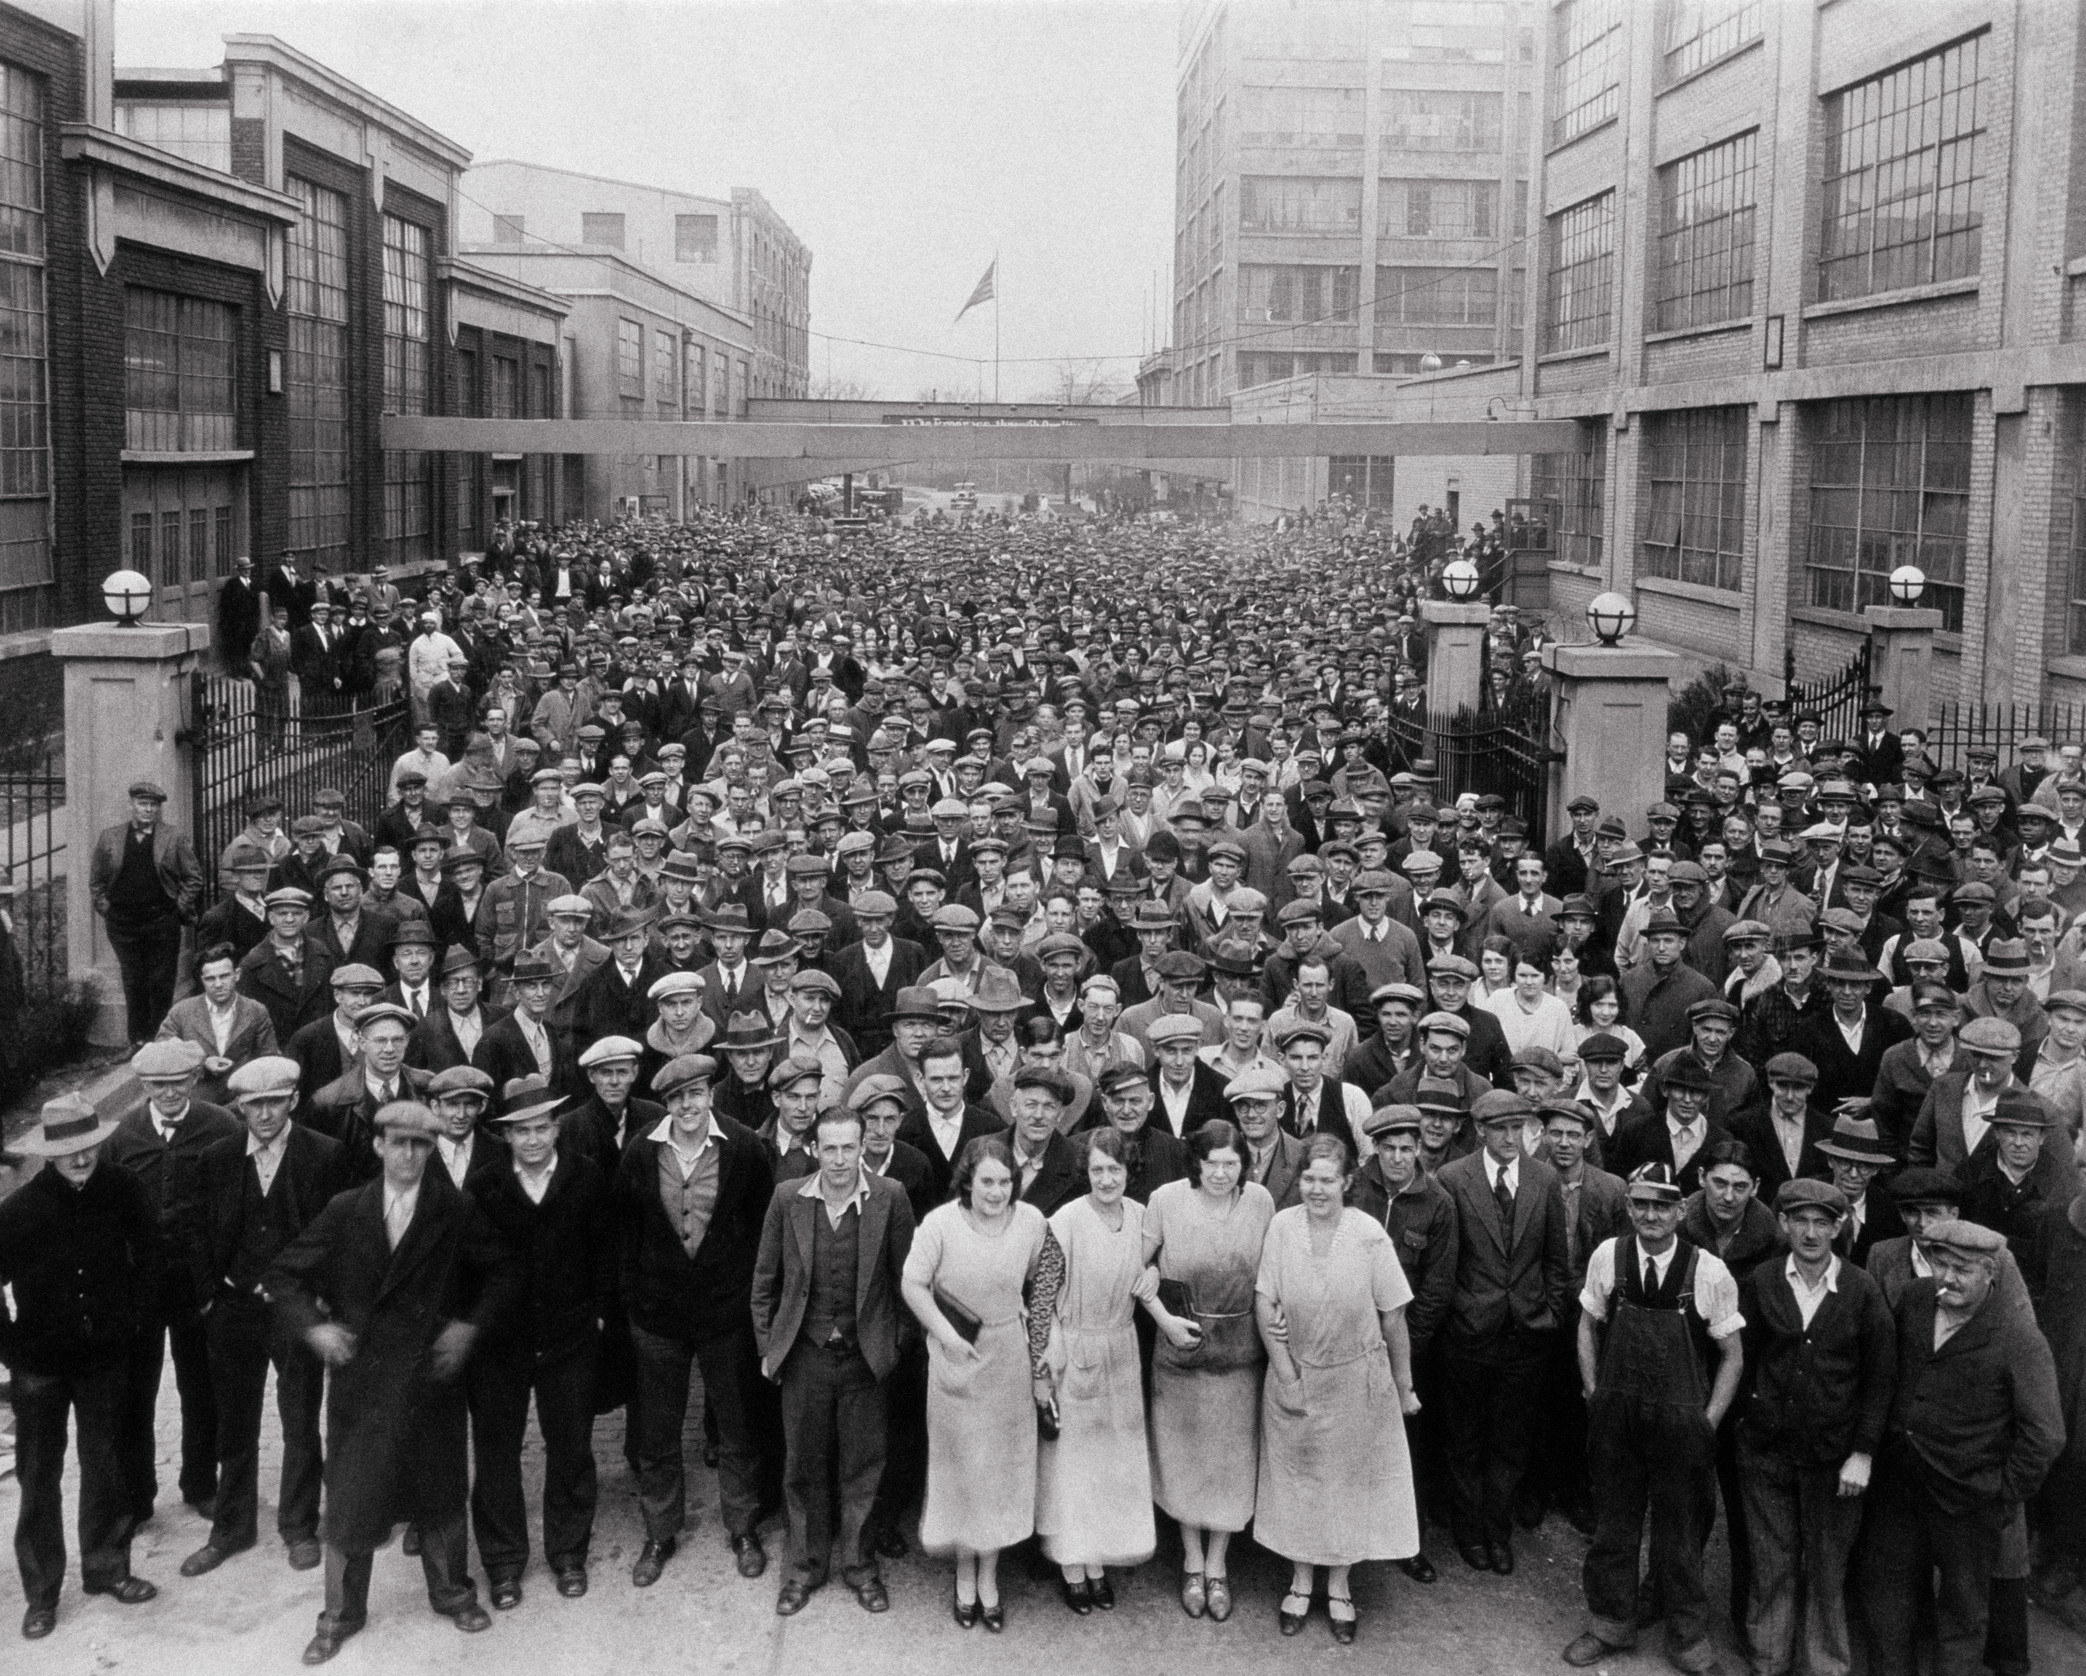 A crowd of men and women pose for a picture outdoors